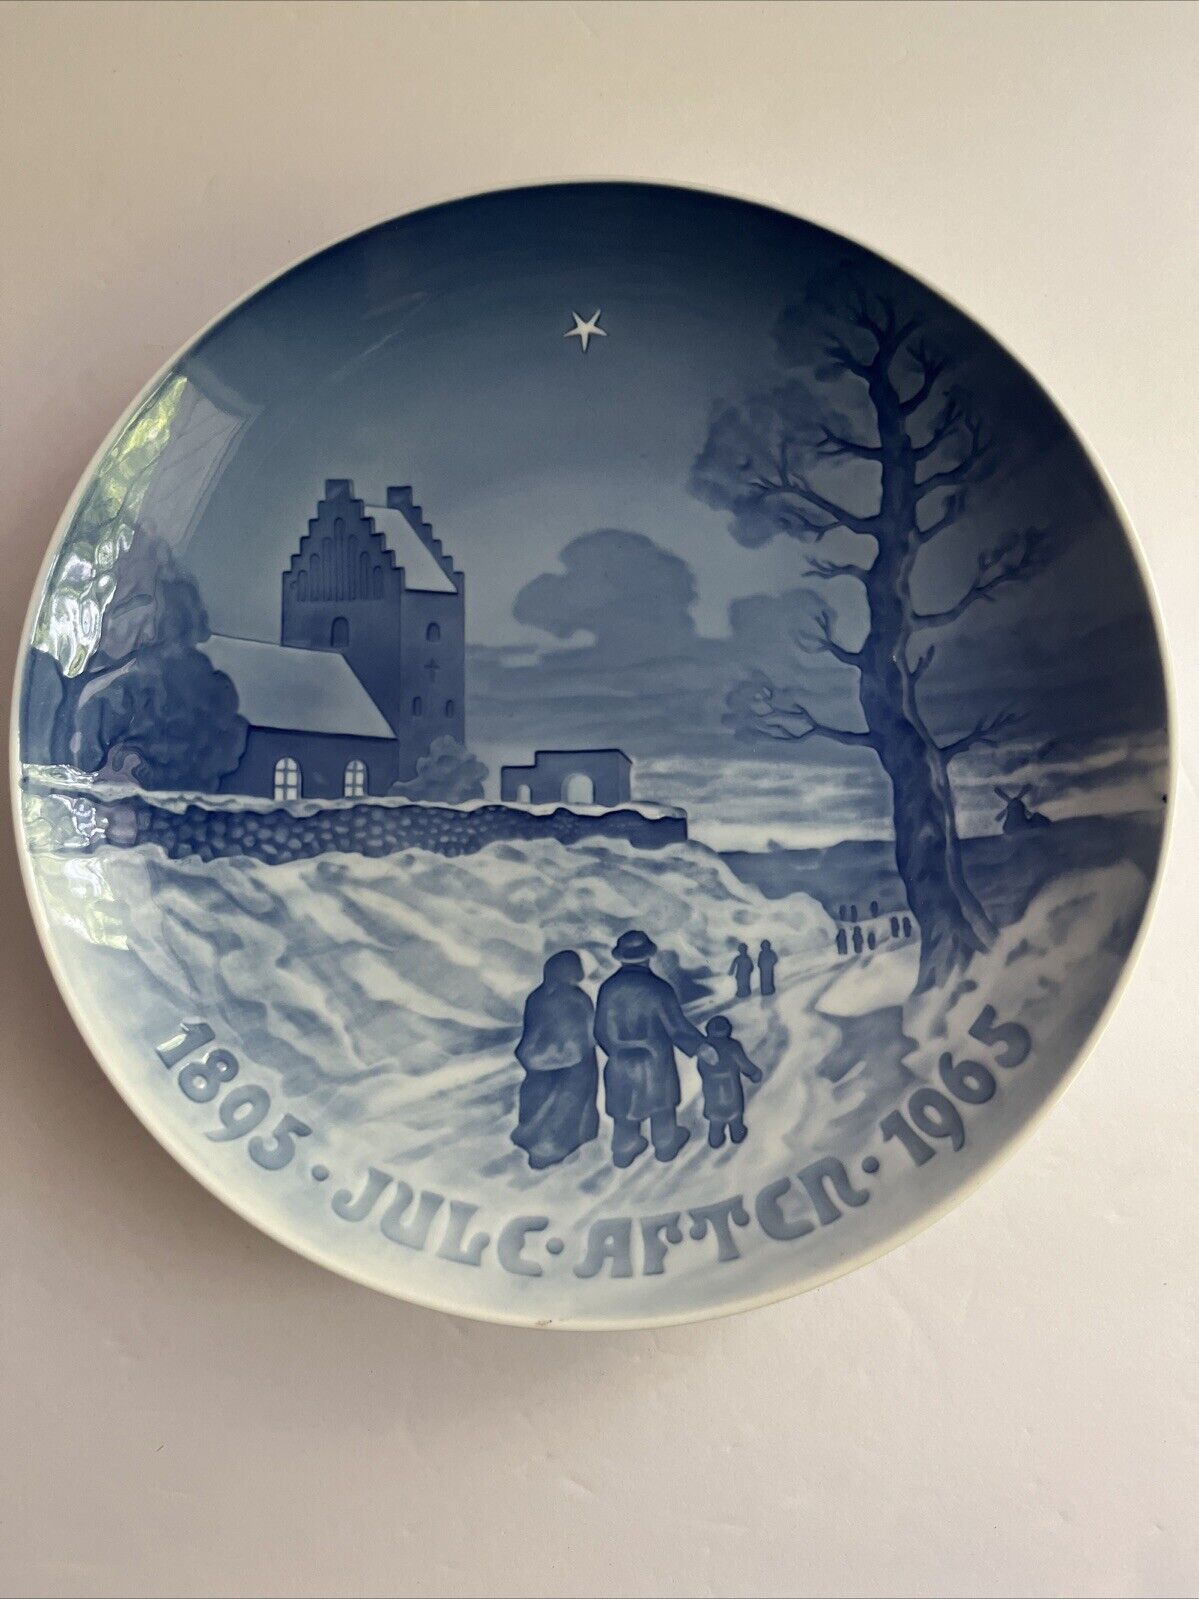 Vintage Bing & Grondahl Christmas Jubilee Collectors Decorative Plate from 1965